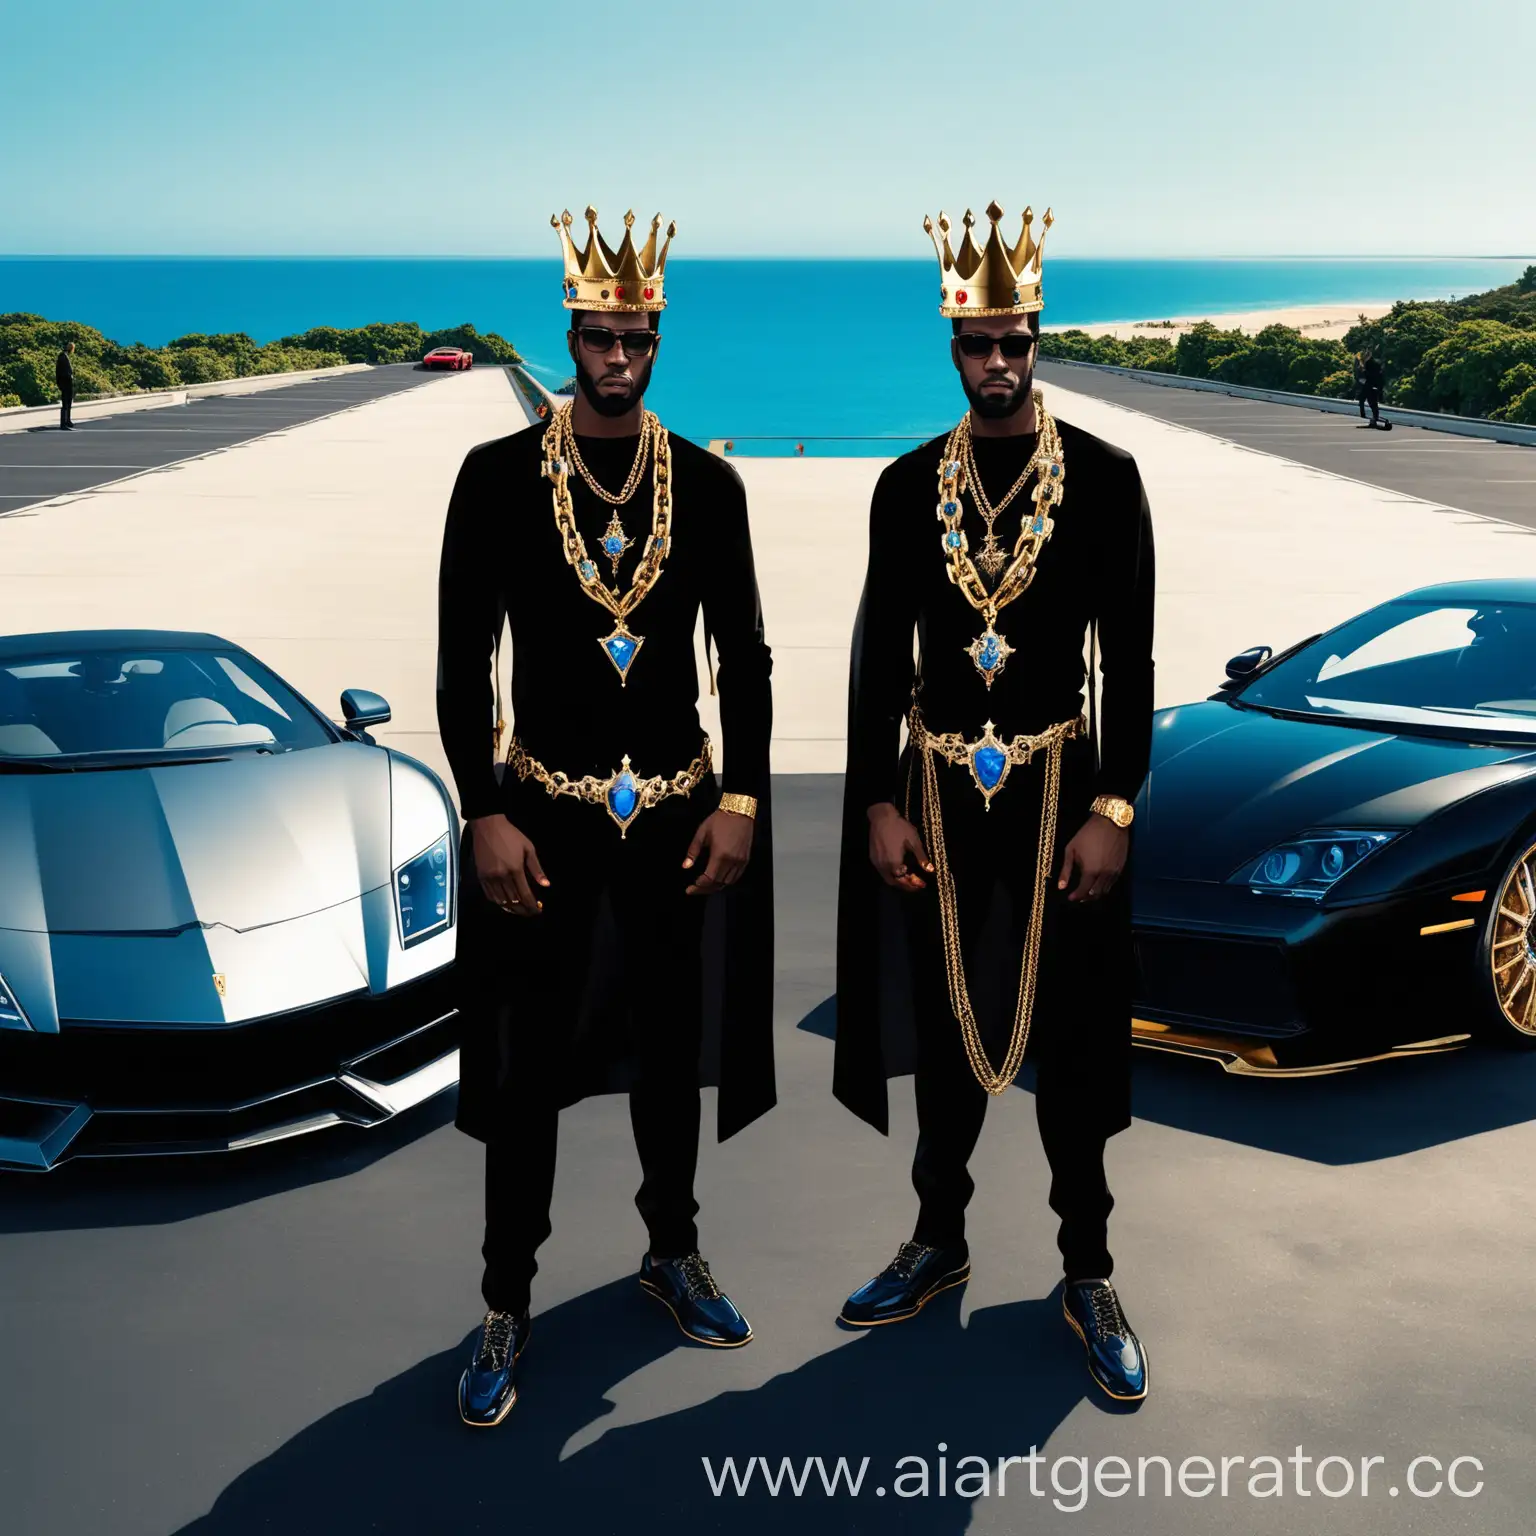 Two-Men-in-Crowns-Standing-by-Luxury-Cars-with-Ocean-View